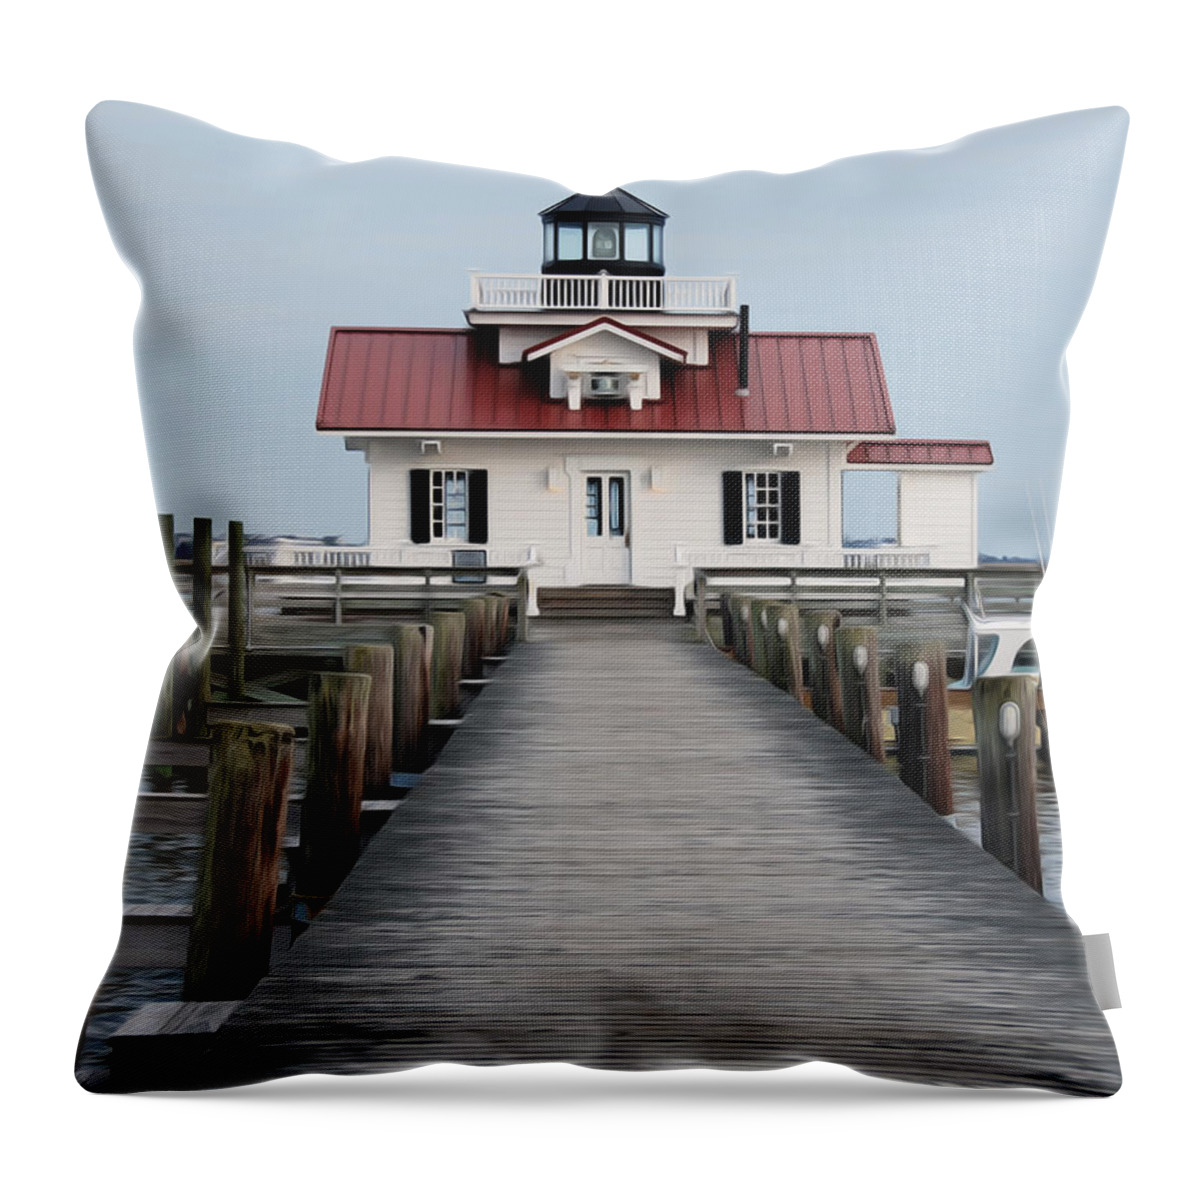 Obx Throw Pillow featuring the digital art Roanoke Marshes Lighthouse by Kelvin Booker